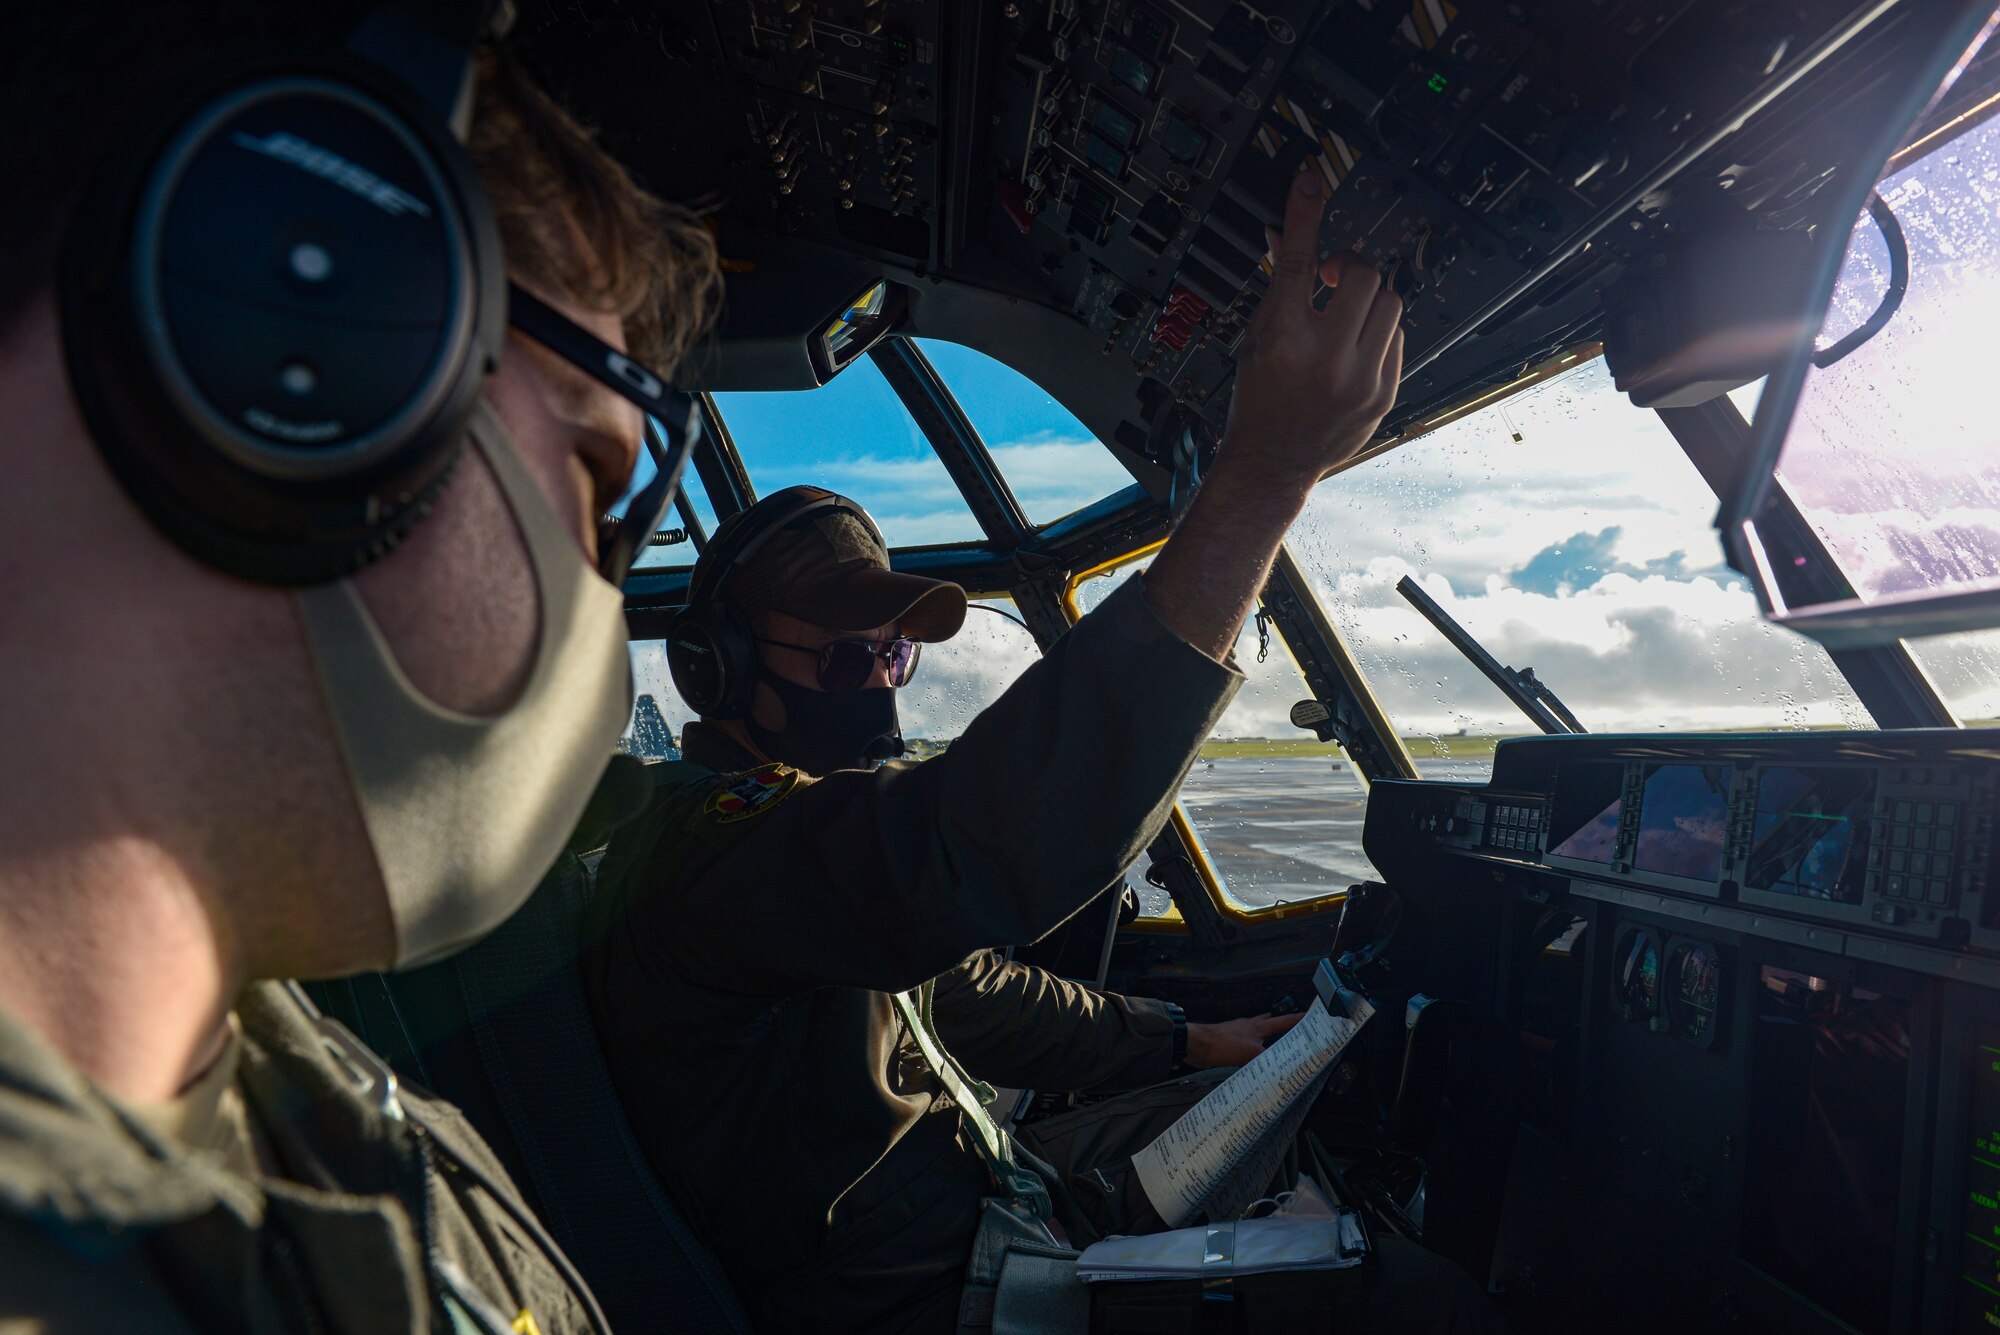 U.S. Air Force Capt. Andrew Zaldiver(left), and USAF Capt. Emery Gumapas, both C-130J Hercules pilots assigned to the 36th Airlift Squadron, Yokota Air Base, Japan, perform pre-inspections on a C-130J before takeoff during a Dynamic Force Employment at Andersen Air Force Base, Guam, Nov. 23,2020. DFE is an operational platform that allows our forces to be strategically predictable and operationally unpredictable. (U.S. Air Force photo by Senior Airman Michael S. Murphy)